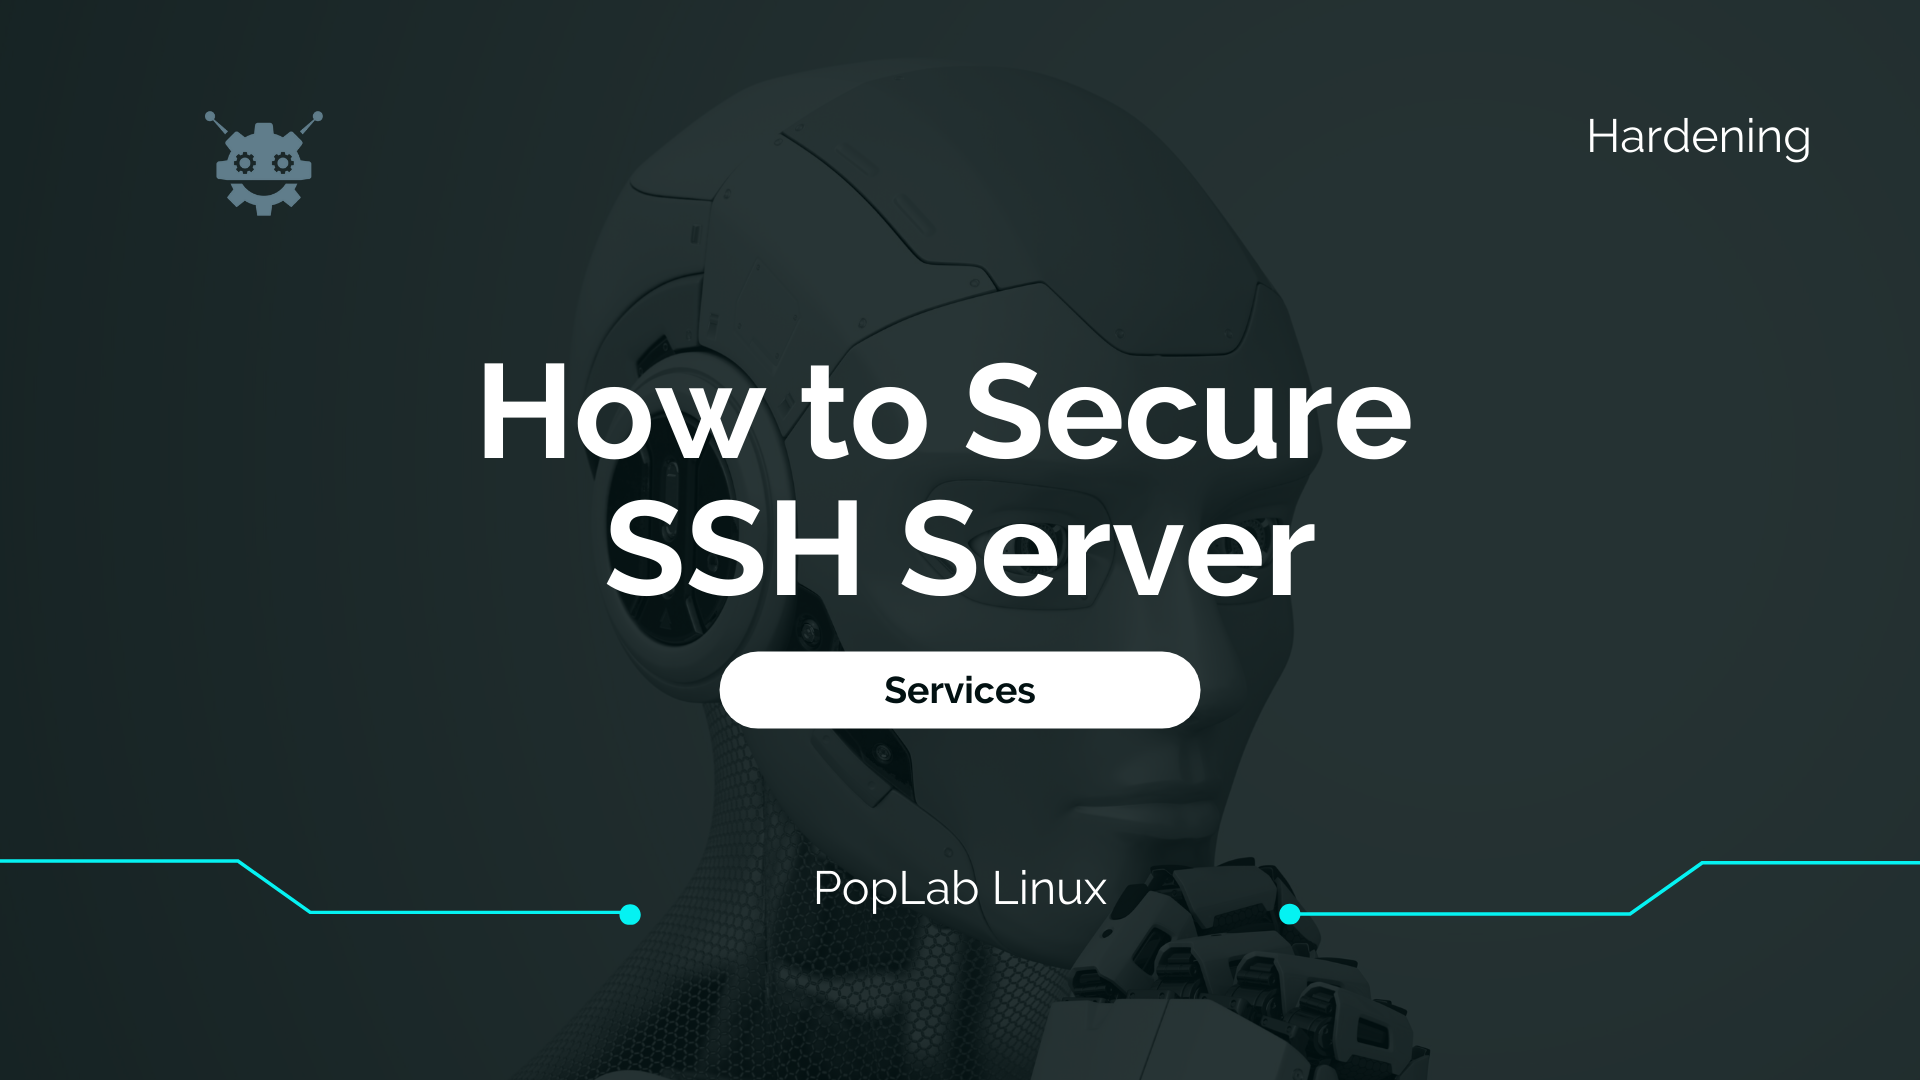 Guide How to Secure SSH Server